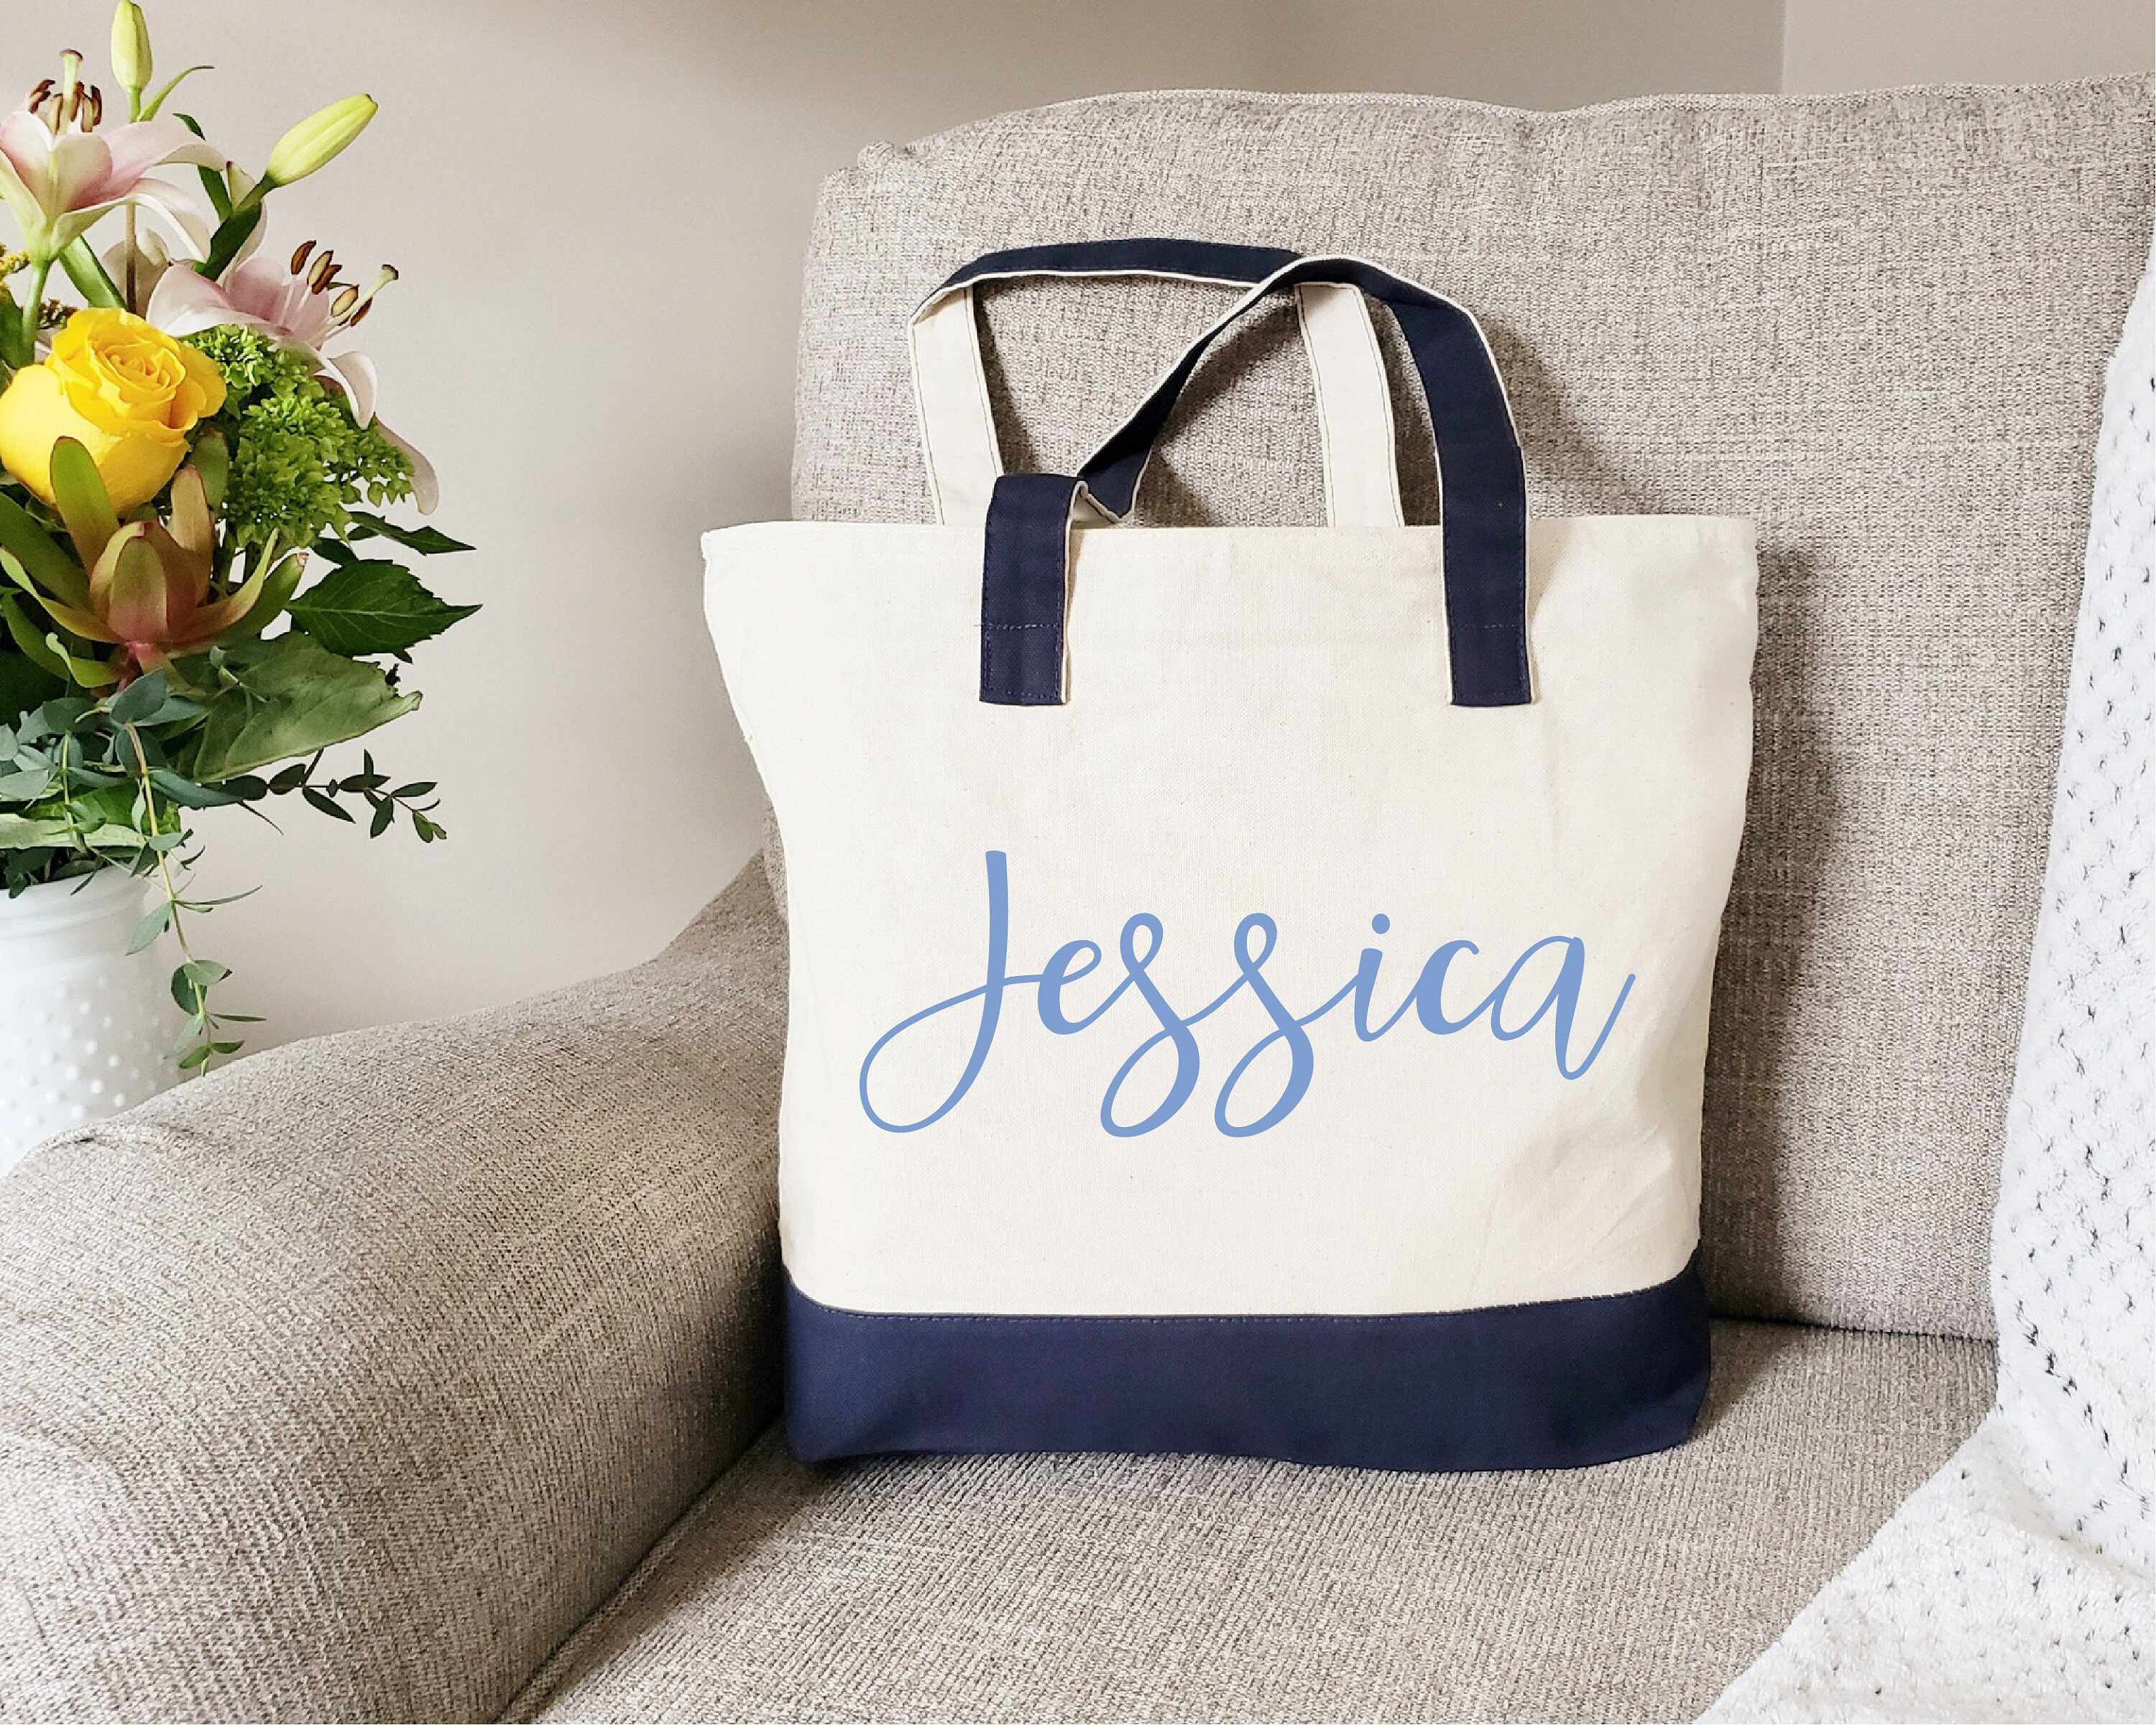 Zipper Tote Bag, Knitting Tote Bag, Knitting Tote Bag Personalized, Knitting  Gifts for Women, Custom Tote, Personalized Tote Bag 